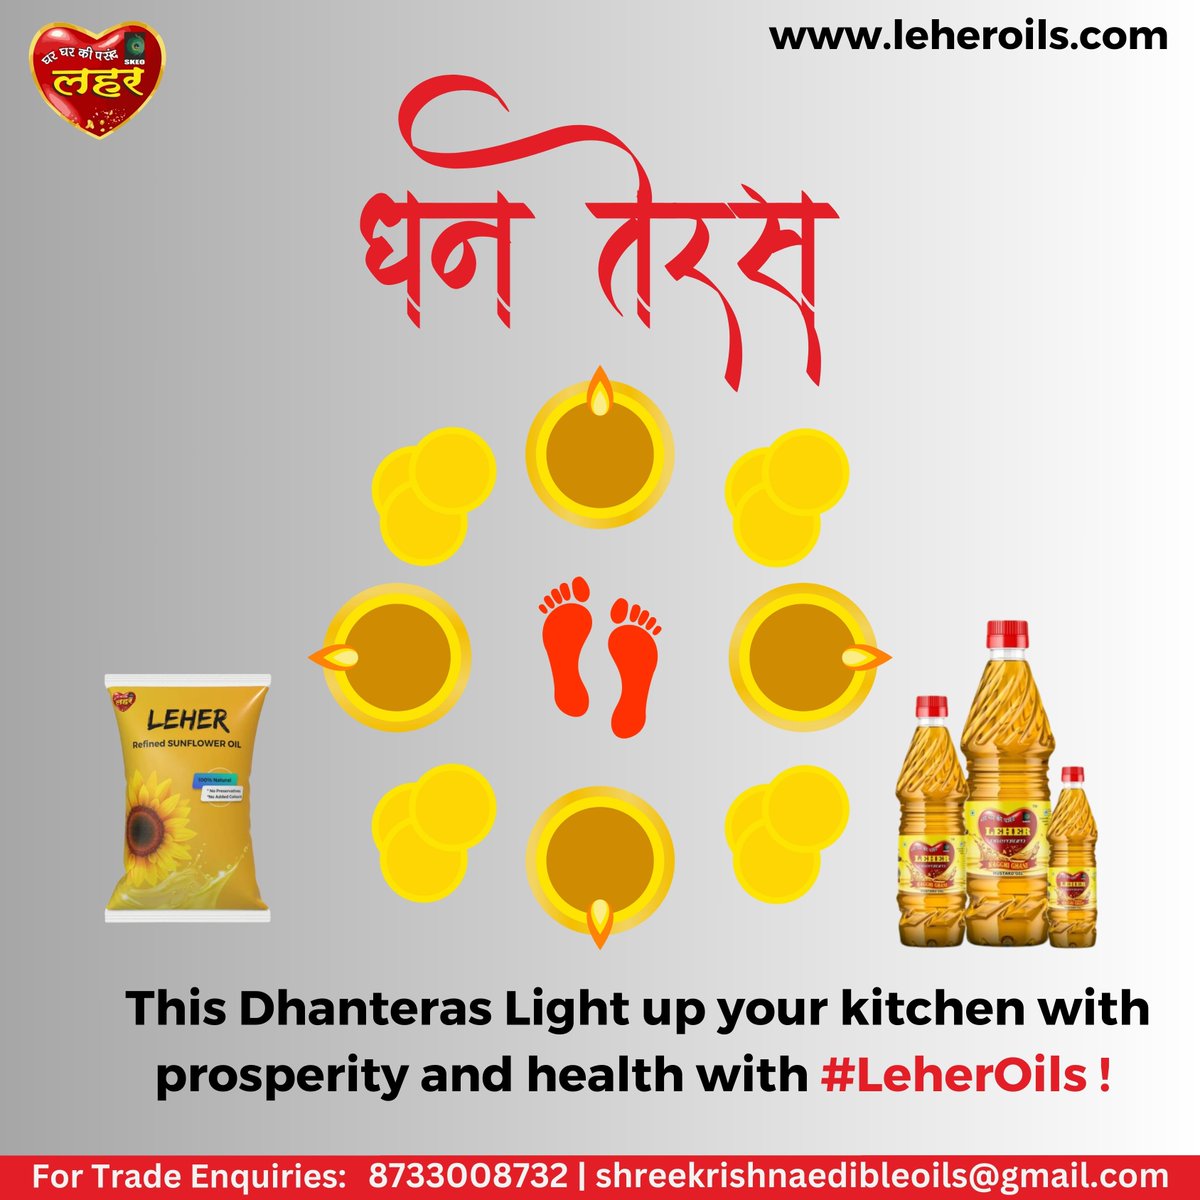 Light up your kitchen with prosperity and health this Dhanteras! ✨✨ Choose Leher Mustard Oil for a golden touch to your celebrations. 🌾🍽️ #DhanterasBlessings #GoldenHarvest #LeherOils #MustardOilMagic #HealthyCelebrations #ProsperousFlavors #Dhanteras #dhanteras #dhanterash